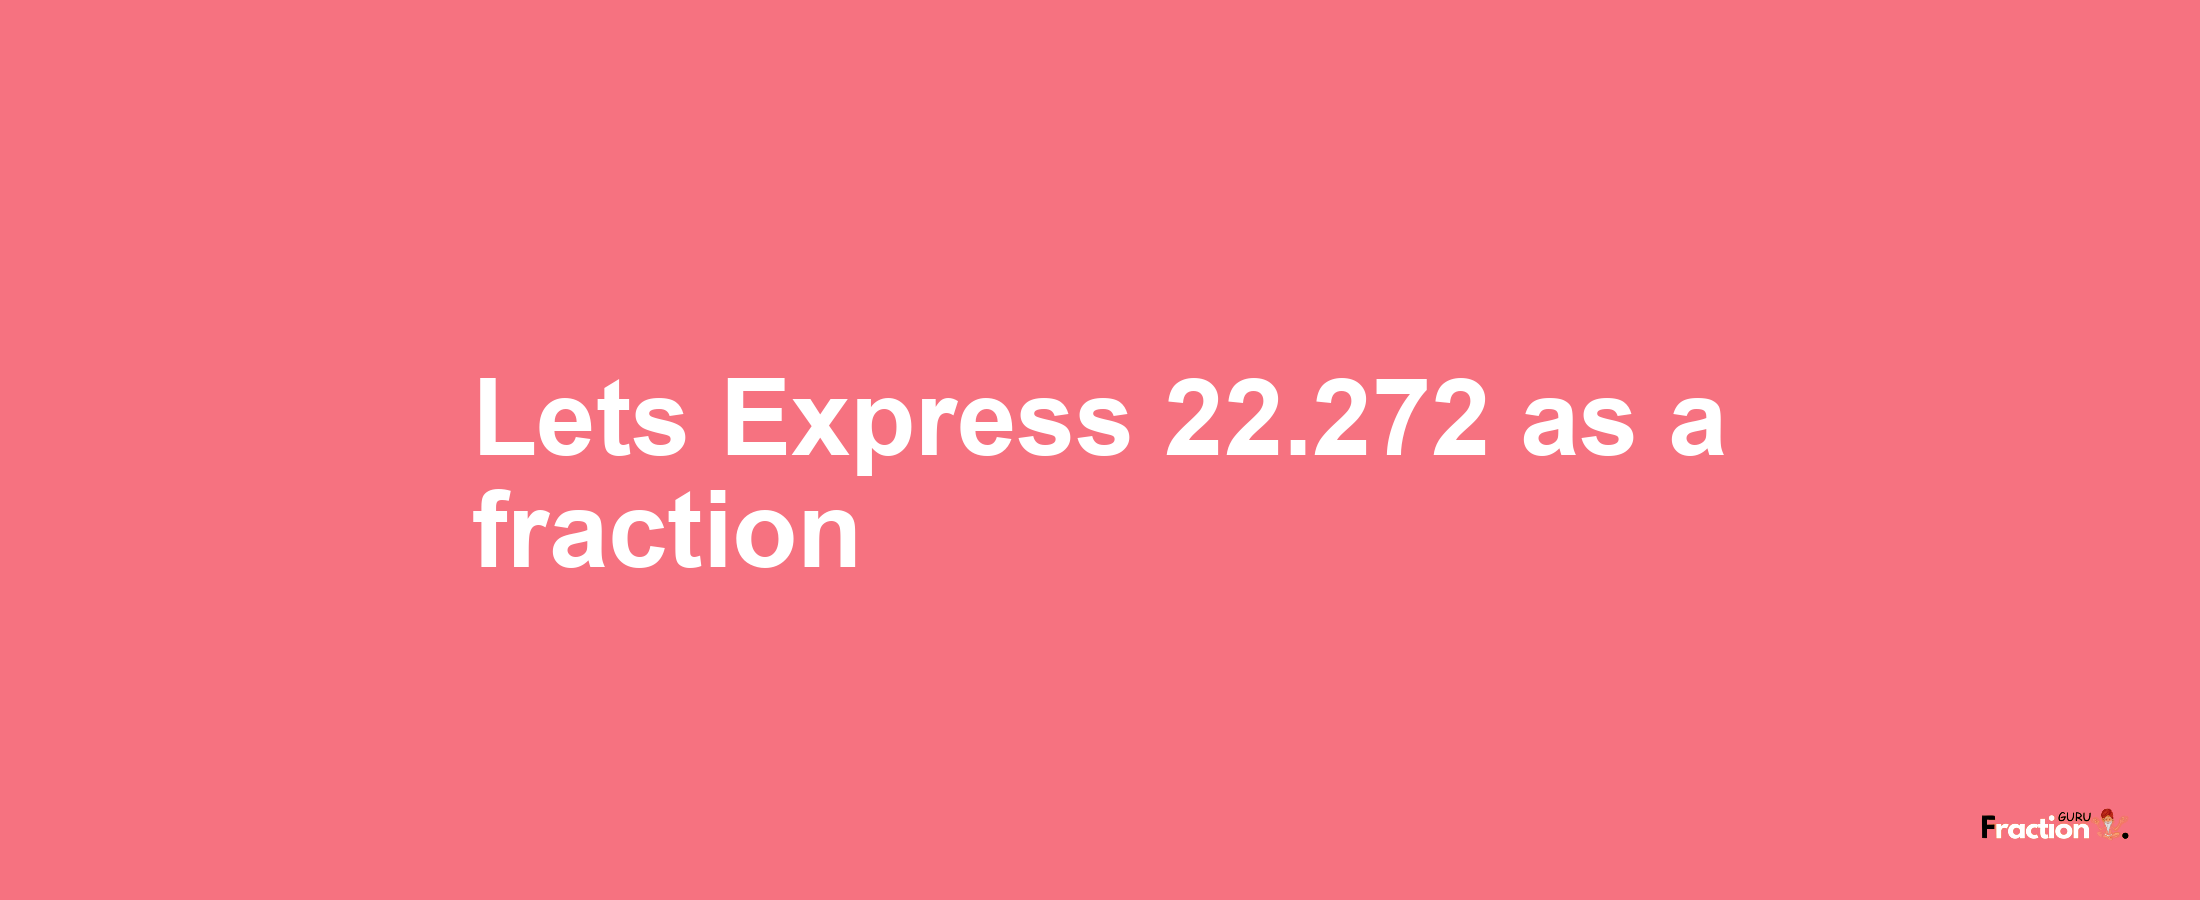 Lets Express 22.272 as afraction